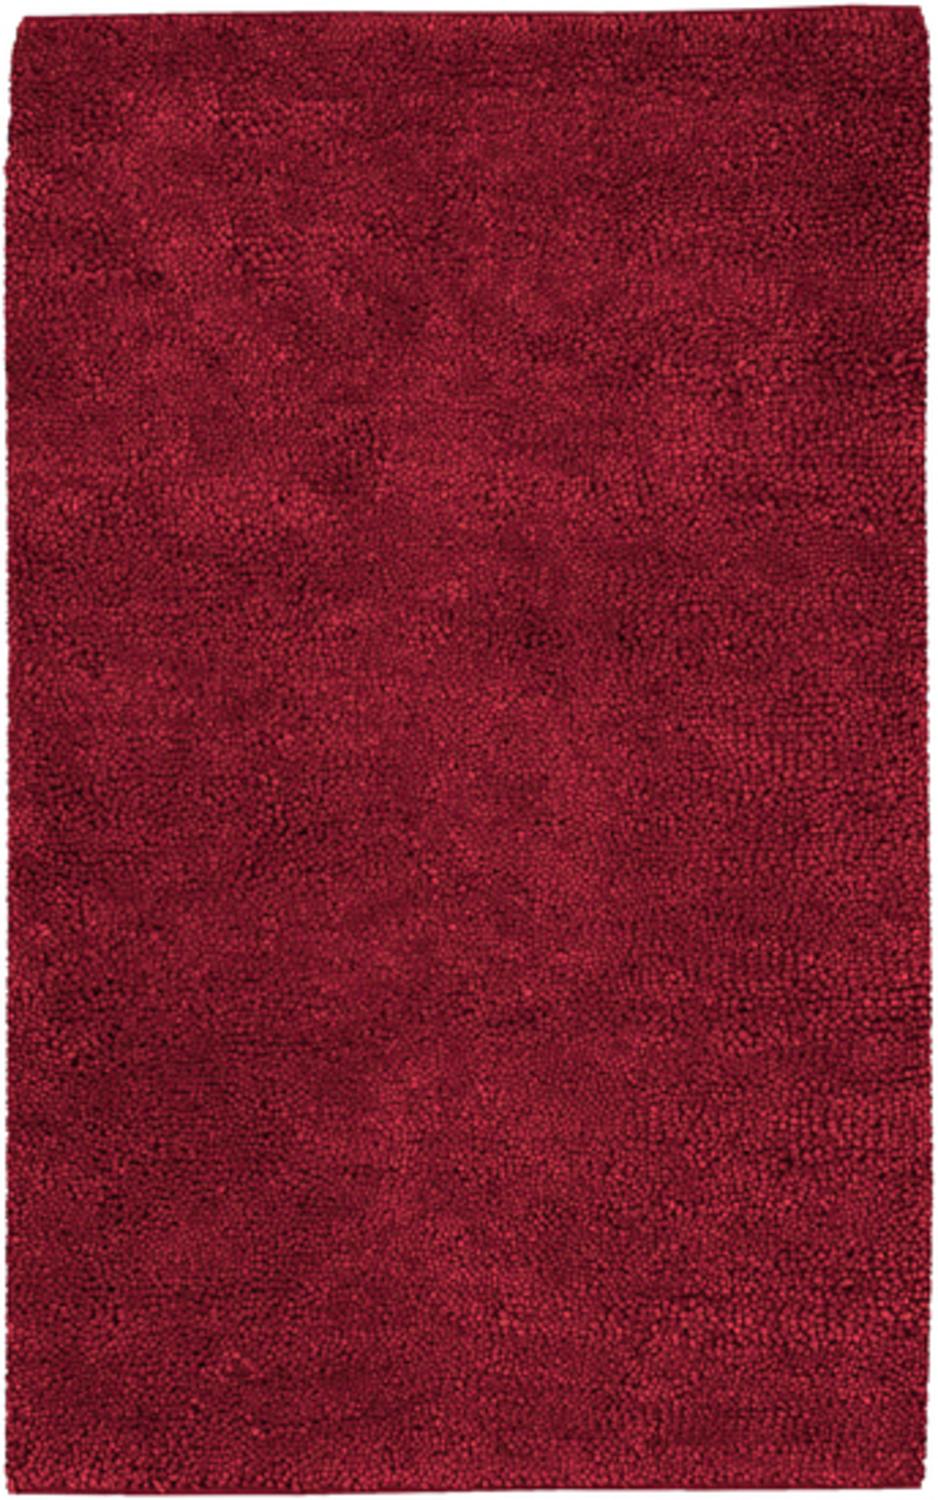 Diva At Home 5' x 8' Solid Crimson Red Hand Woven Zealand Wool Shag Area Throw Rug